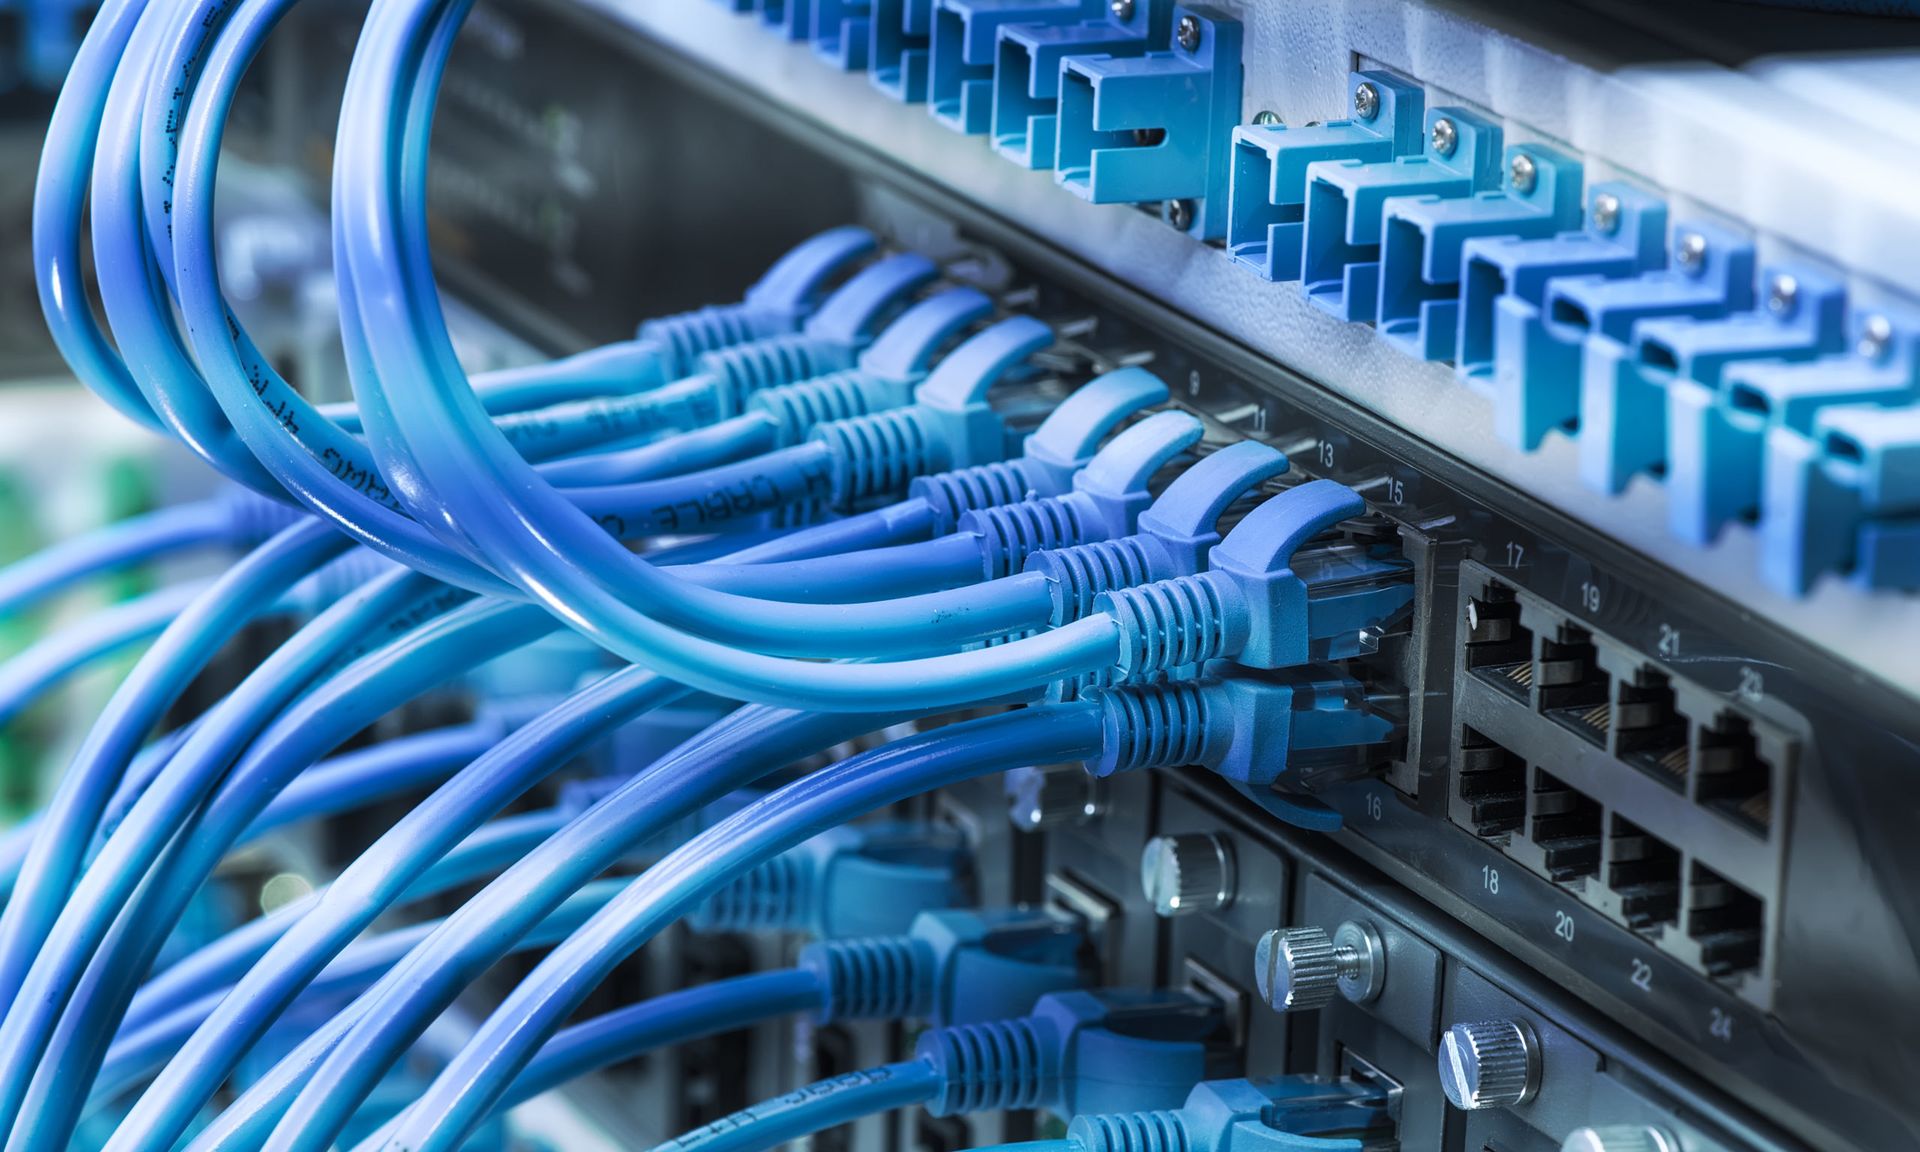 Patch network cables connected to switch. (iStock/Getty Images)